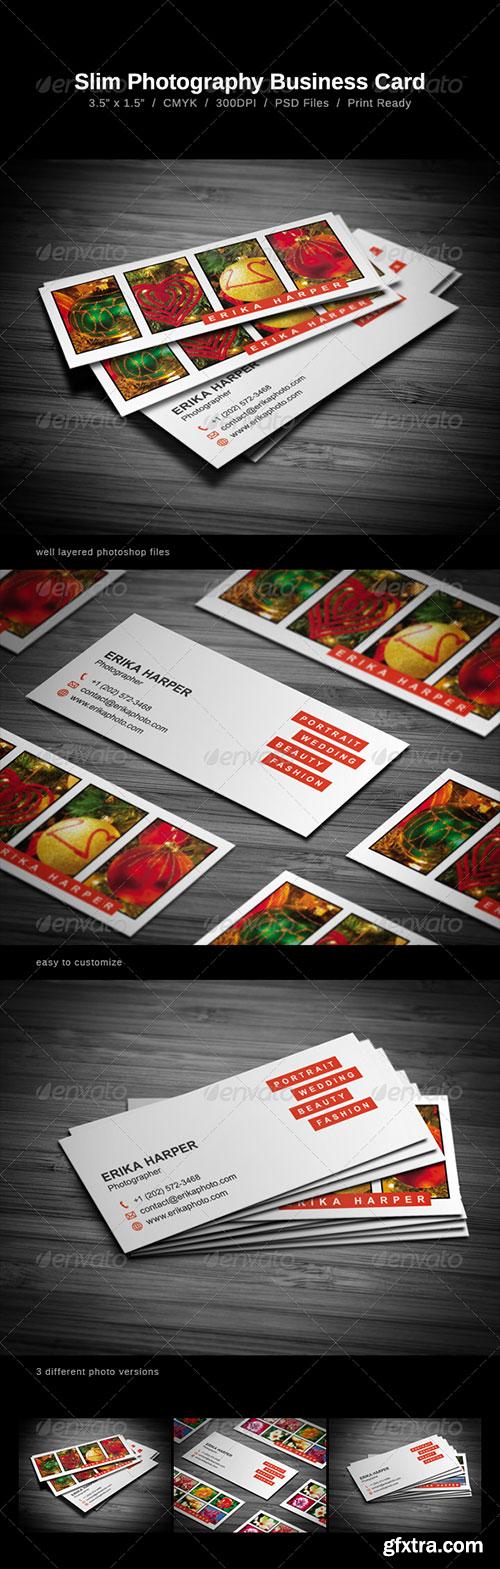 GraphicRiver - Slim Photography Business Card